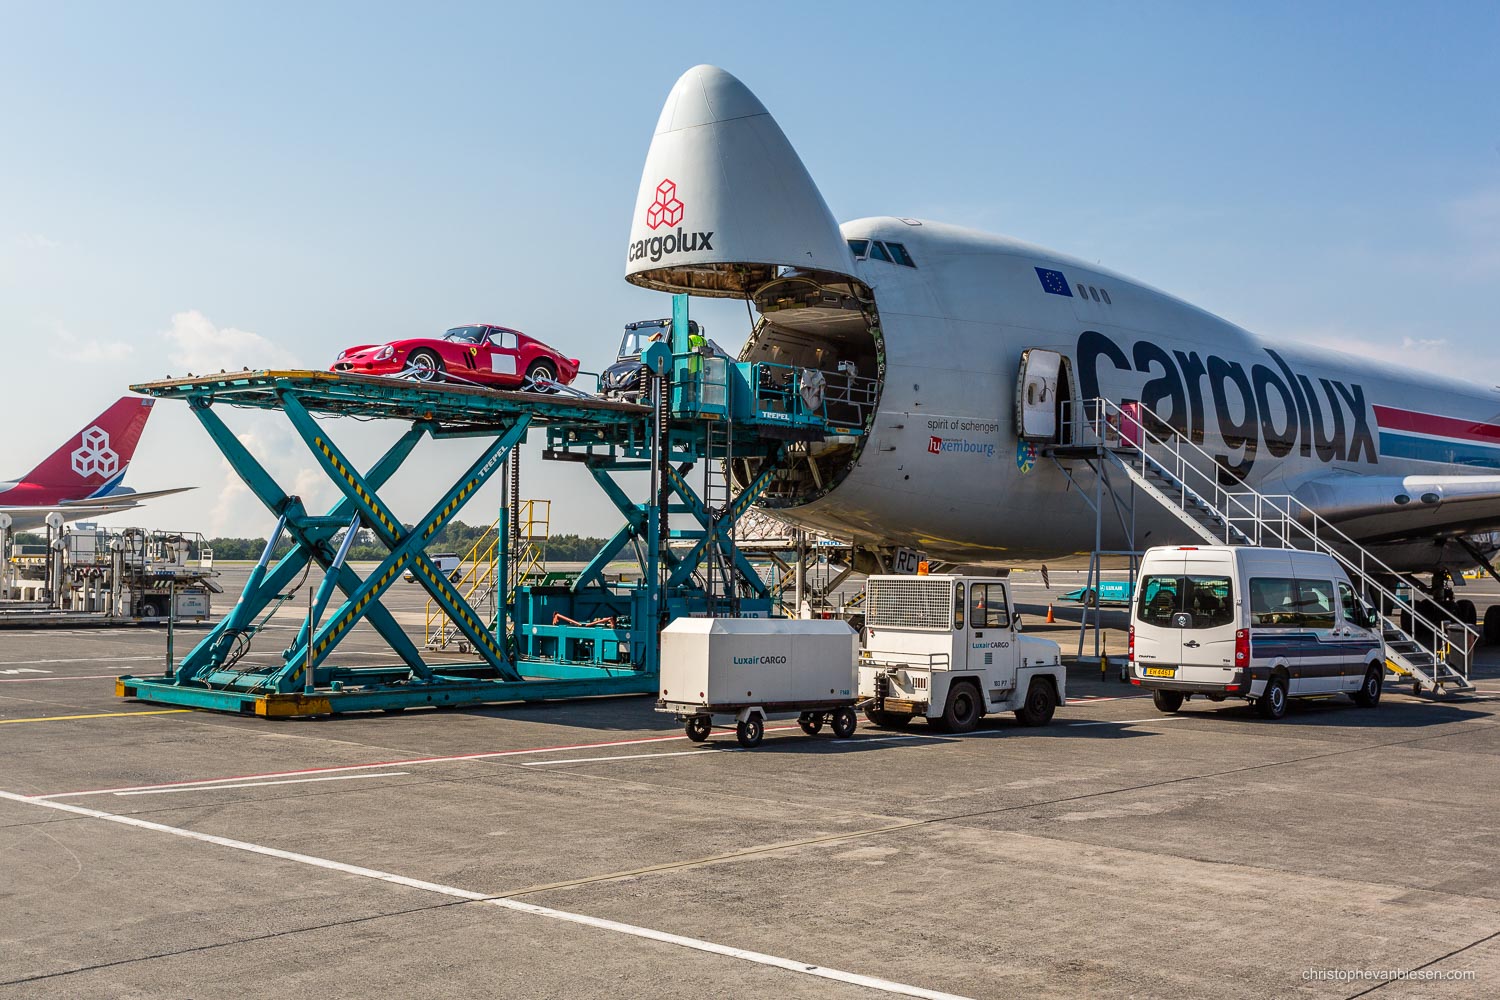 Work with me - Commission Work - Boeing 747 of Luxembourg's Cargolux fleet - Precious Cargo - Photography by Christophe Van Biesen - Luxembourg Landscape and Travel Photographer